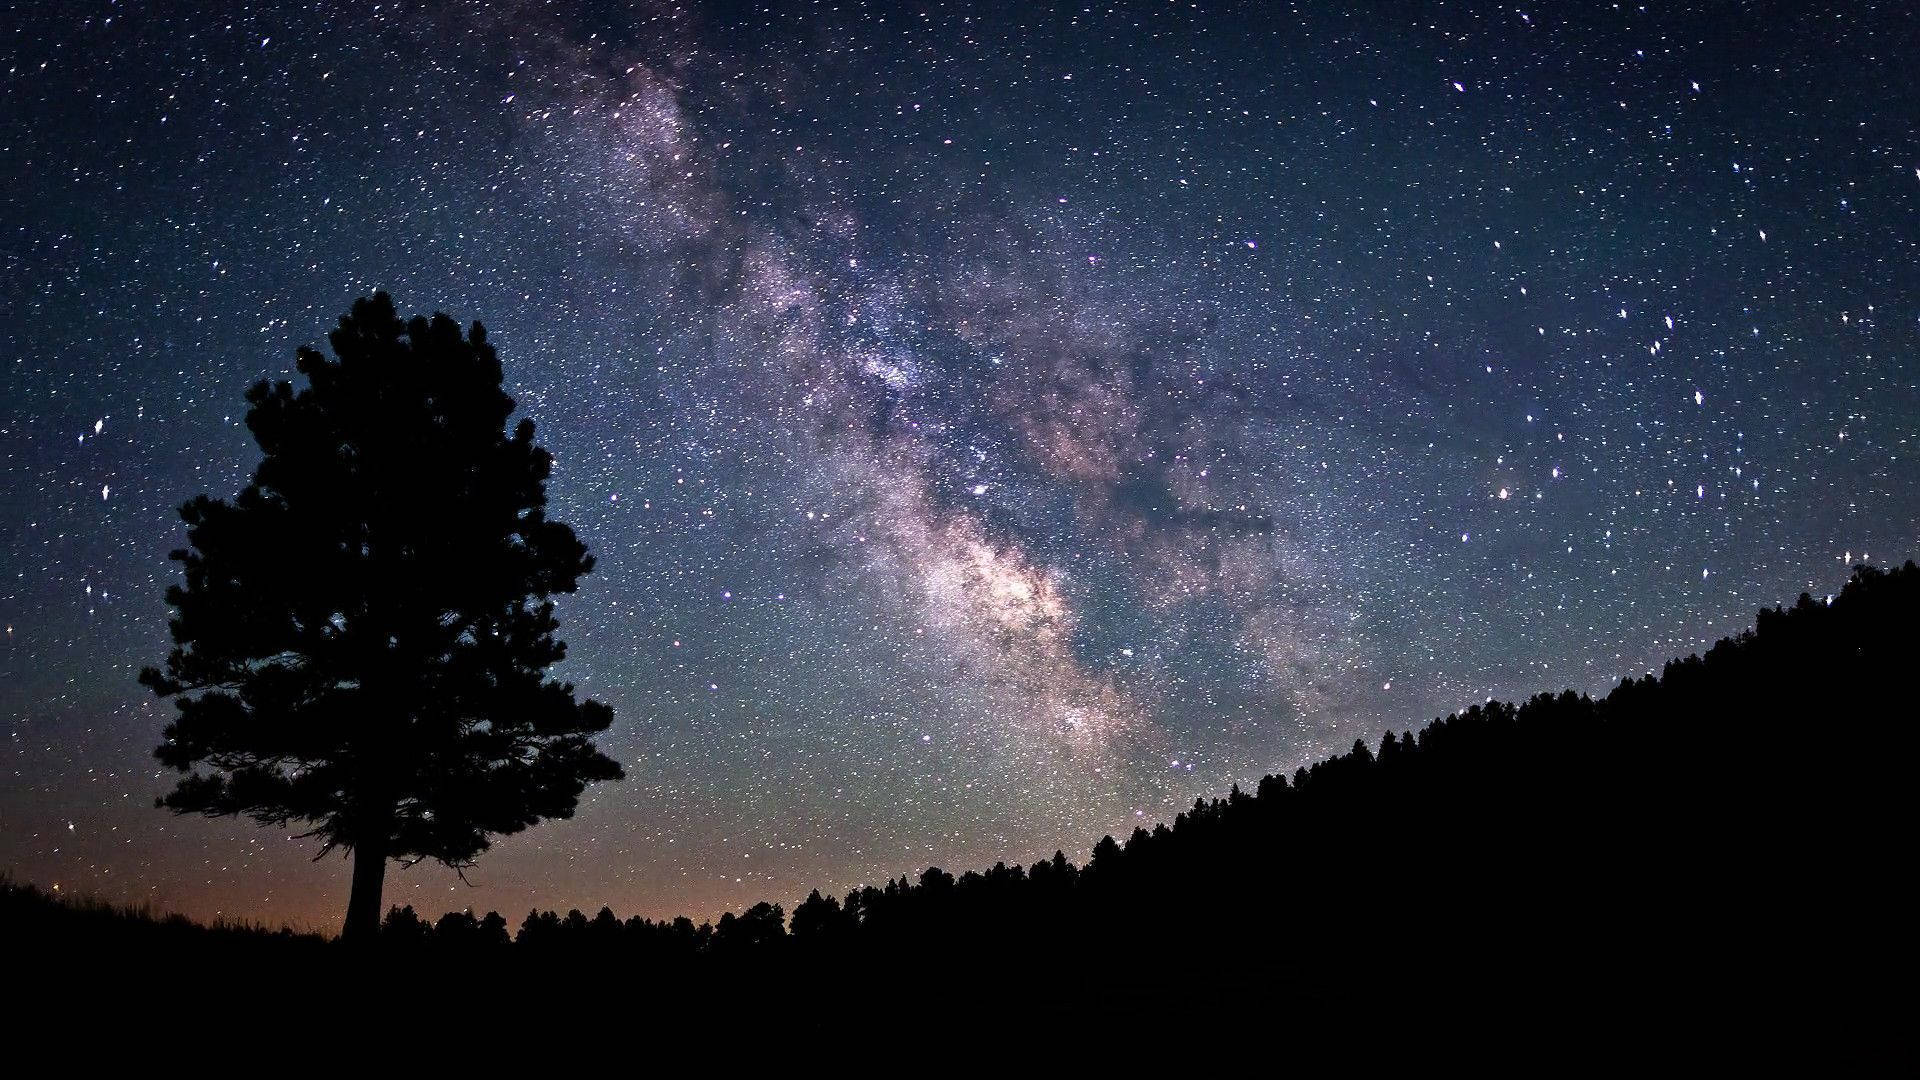 Milky Way Cool Hd Lonely Tree Wallpapers